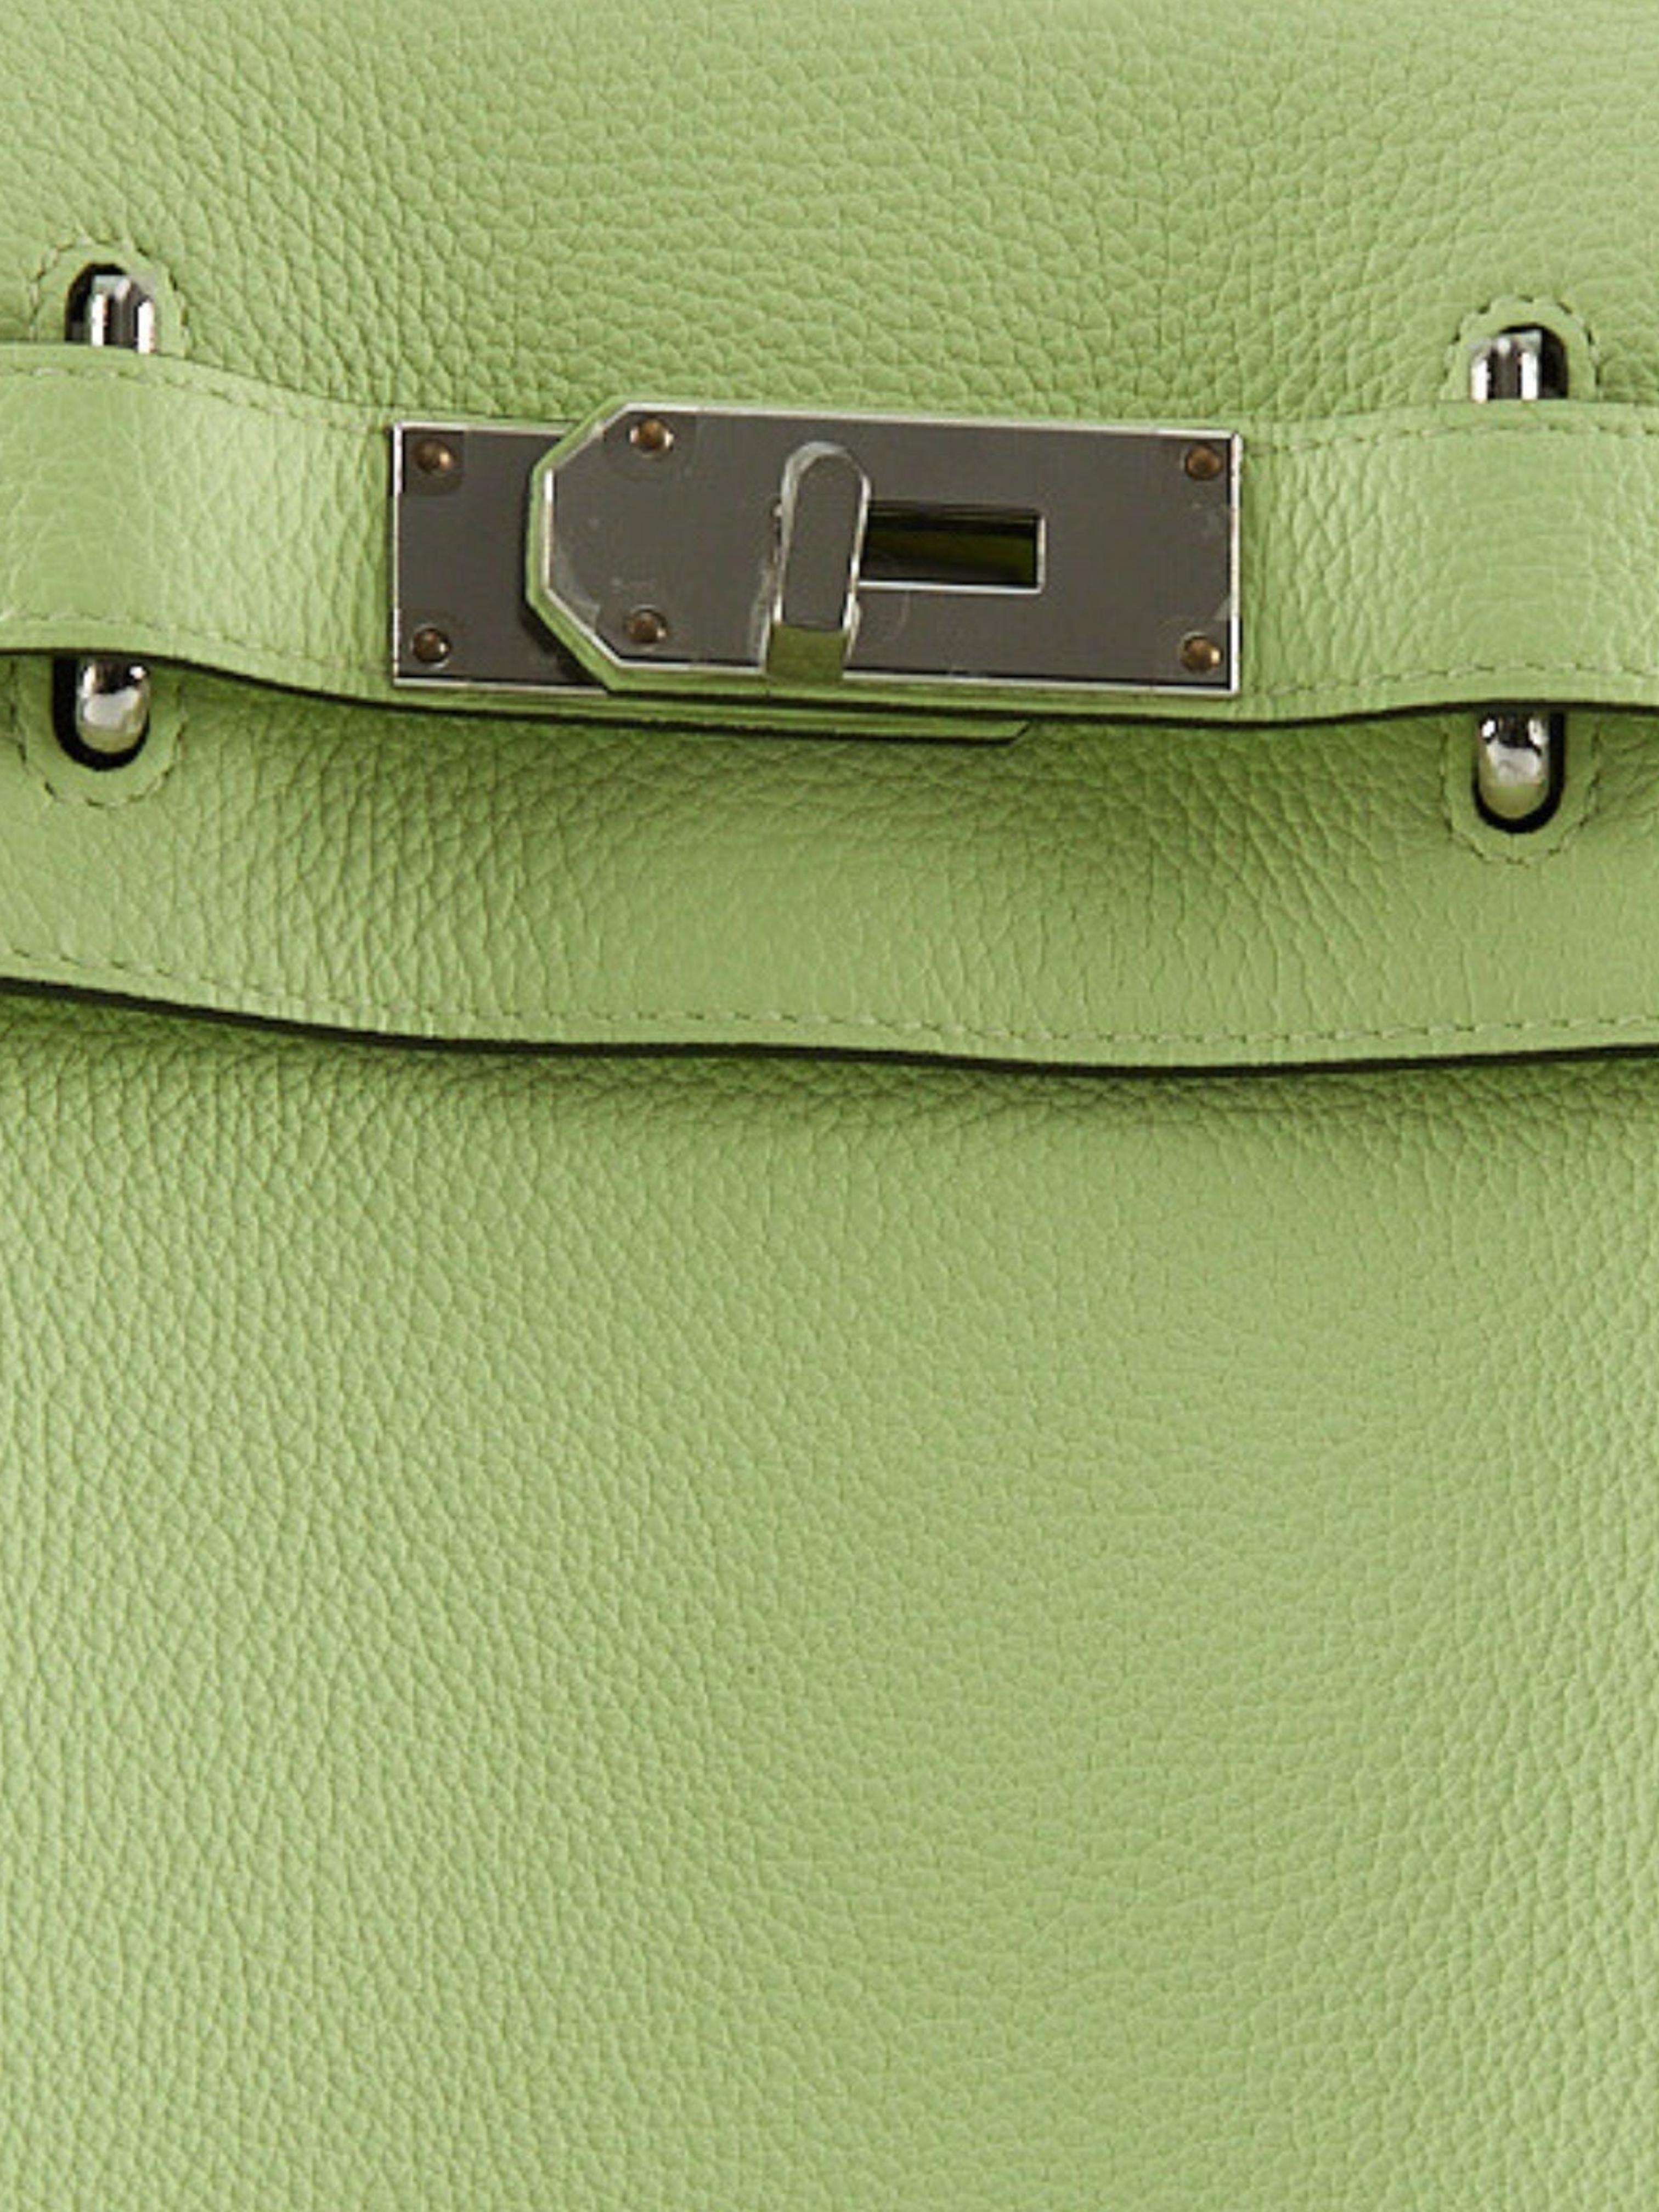 Hermès 'Hac a Dos' Backpack in Vert Absinthe

Togo Leather with Palladium Hardware

B Stamp / 2023

Accompanied by: Original receipt, Hermes box, Hermes dustbag, care card, felt and ribbon

Adjustable shoulder strap, large compartment, interior back